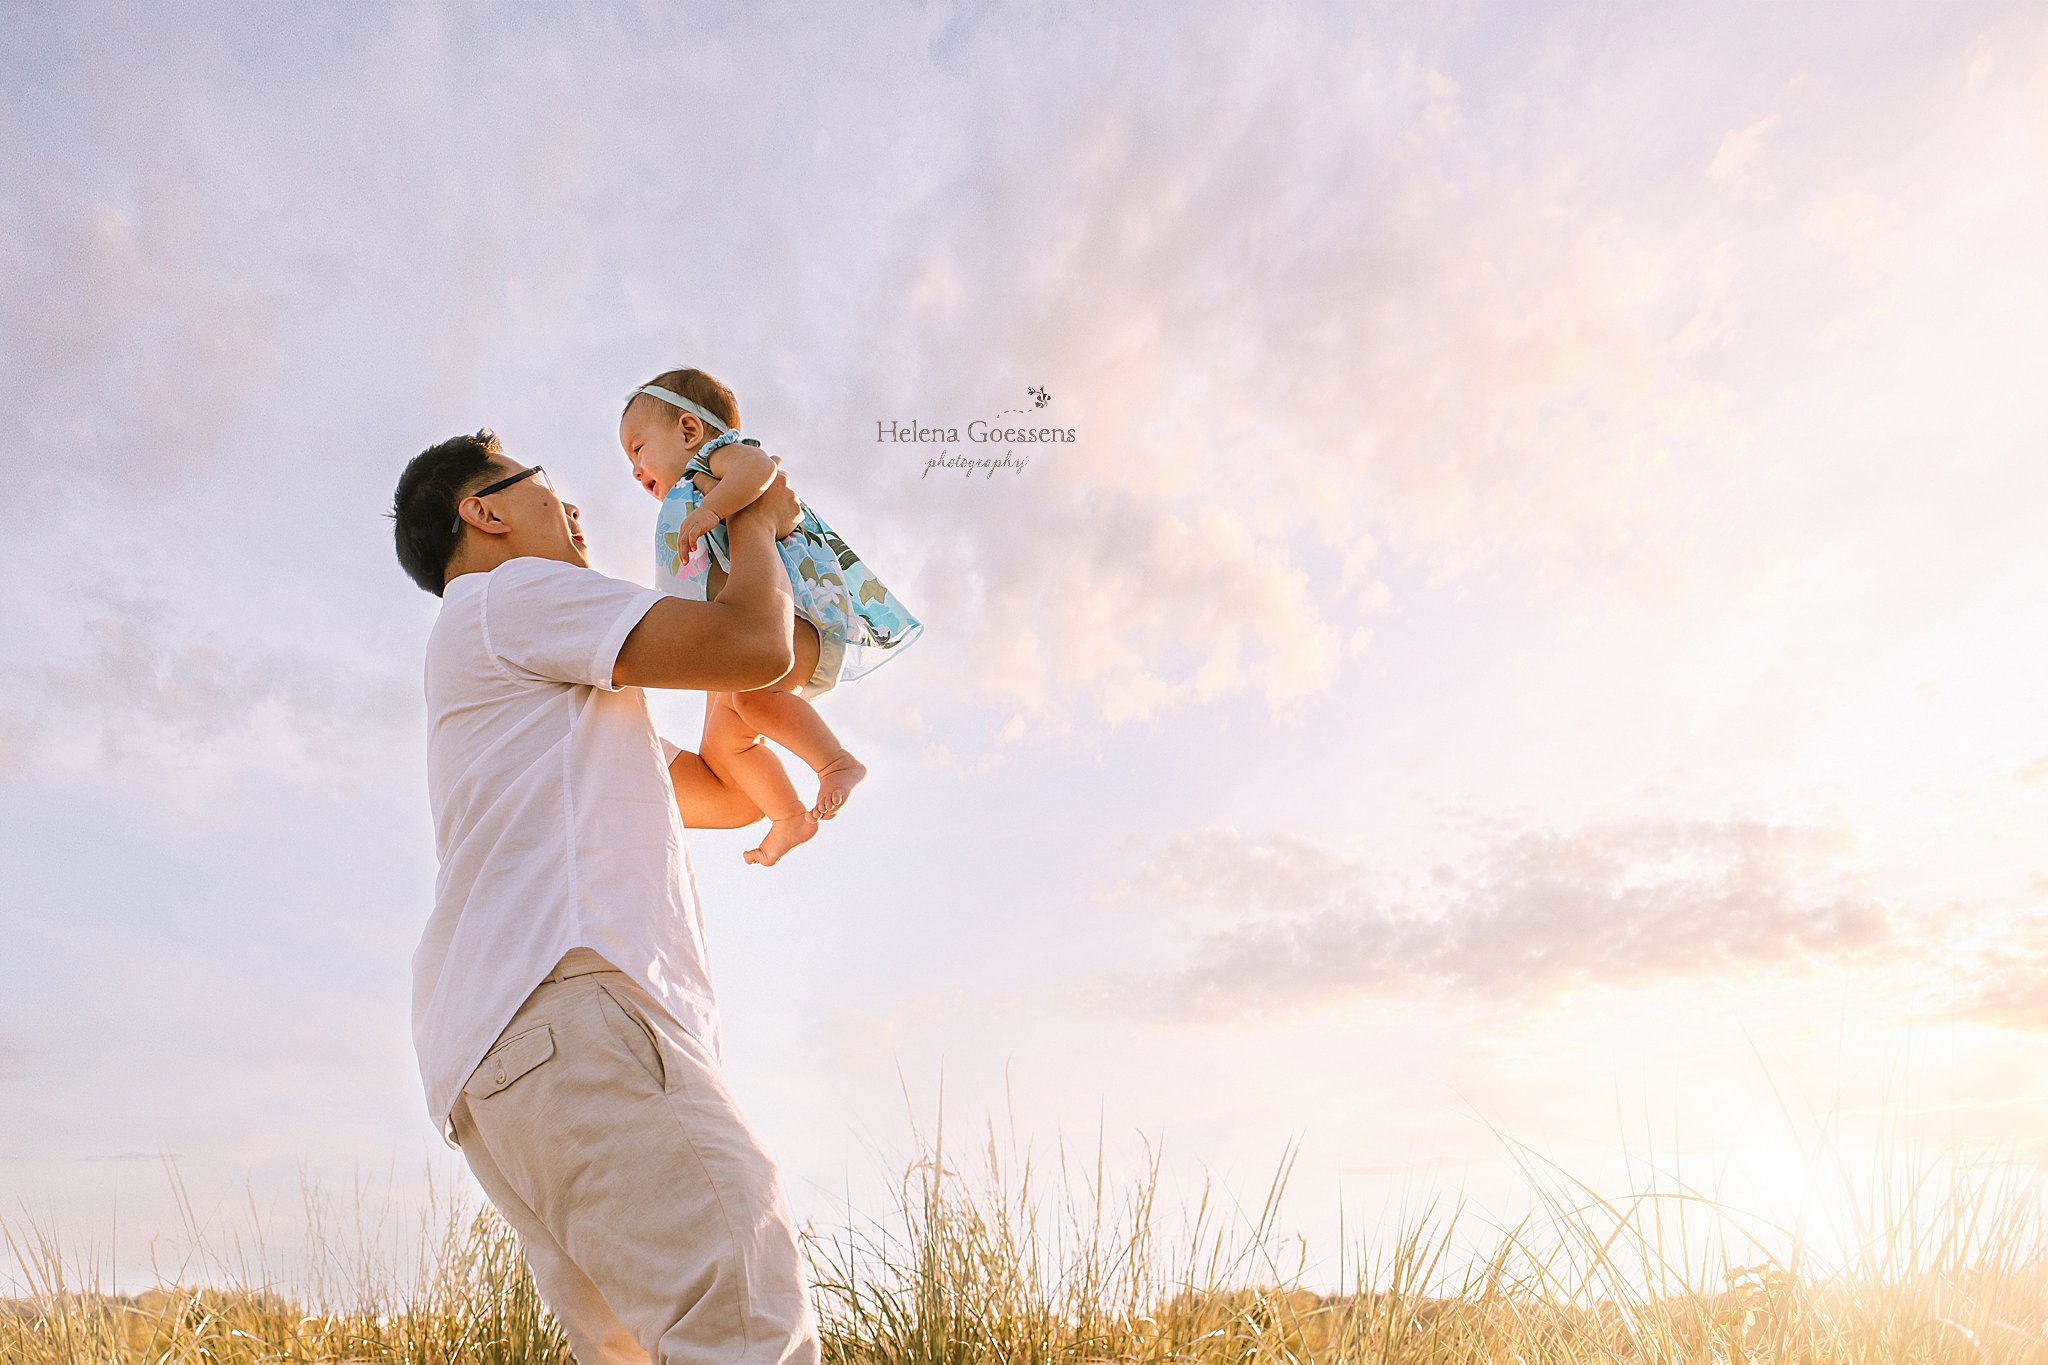 Helena Goessens Photography photographs dad lifting baby girl in blue dress